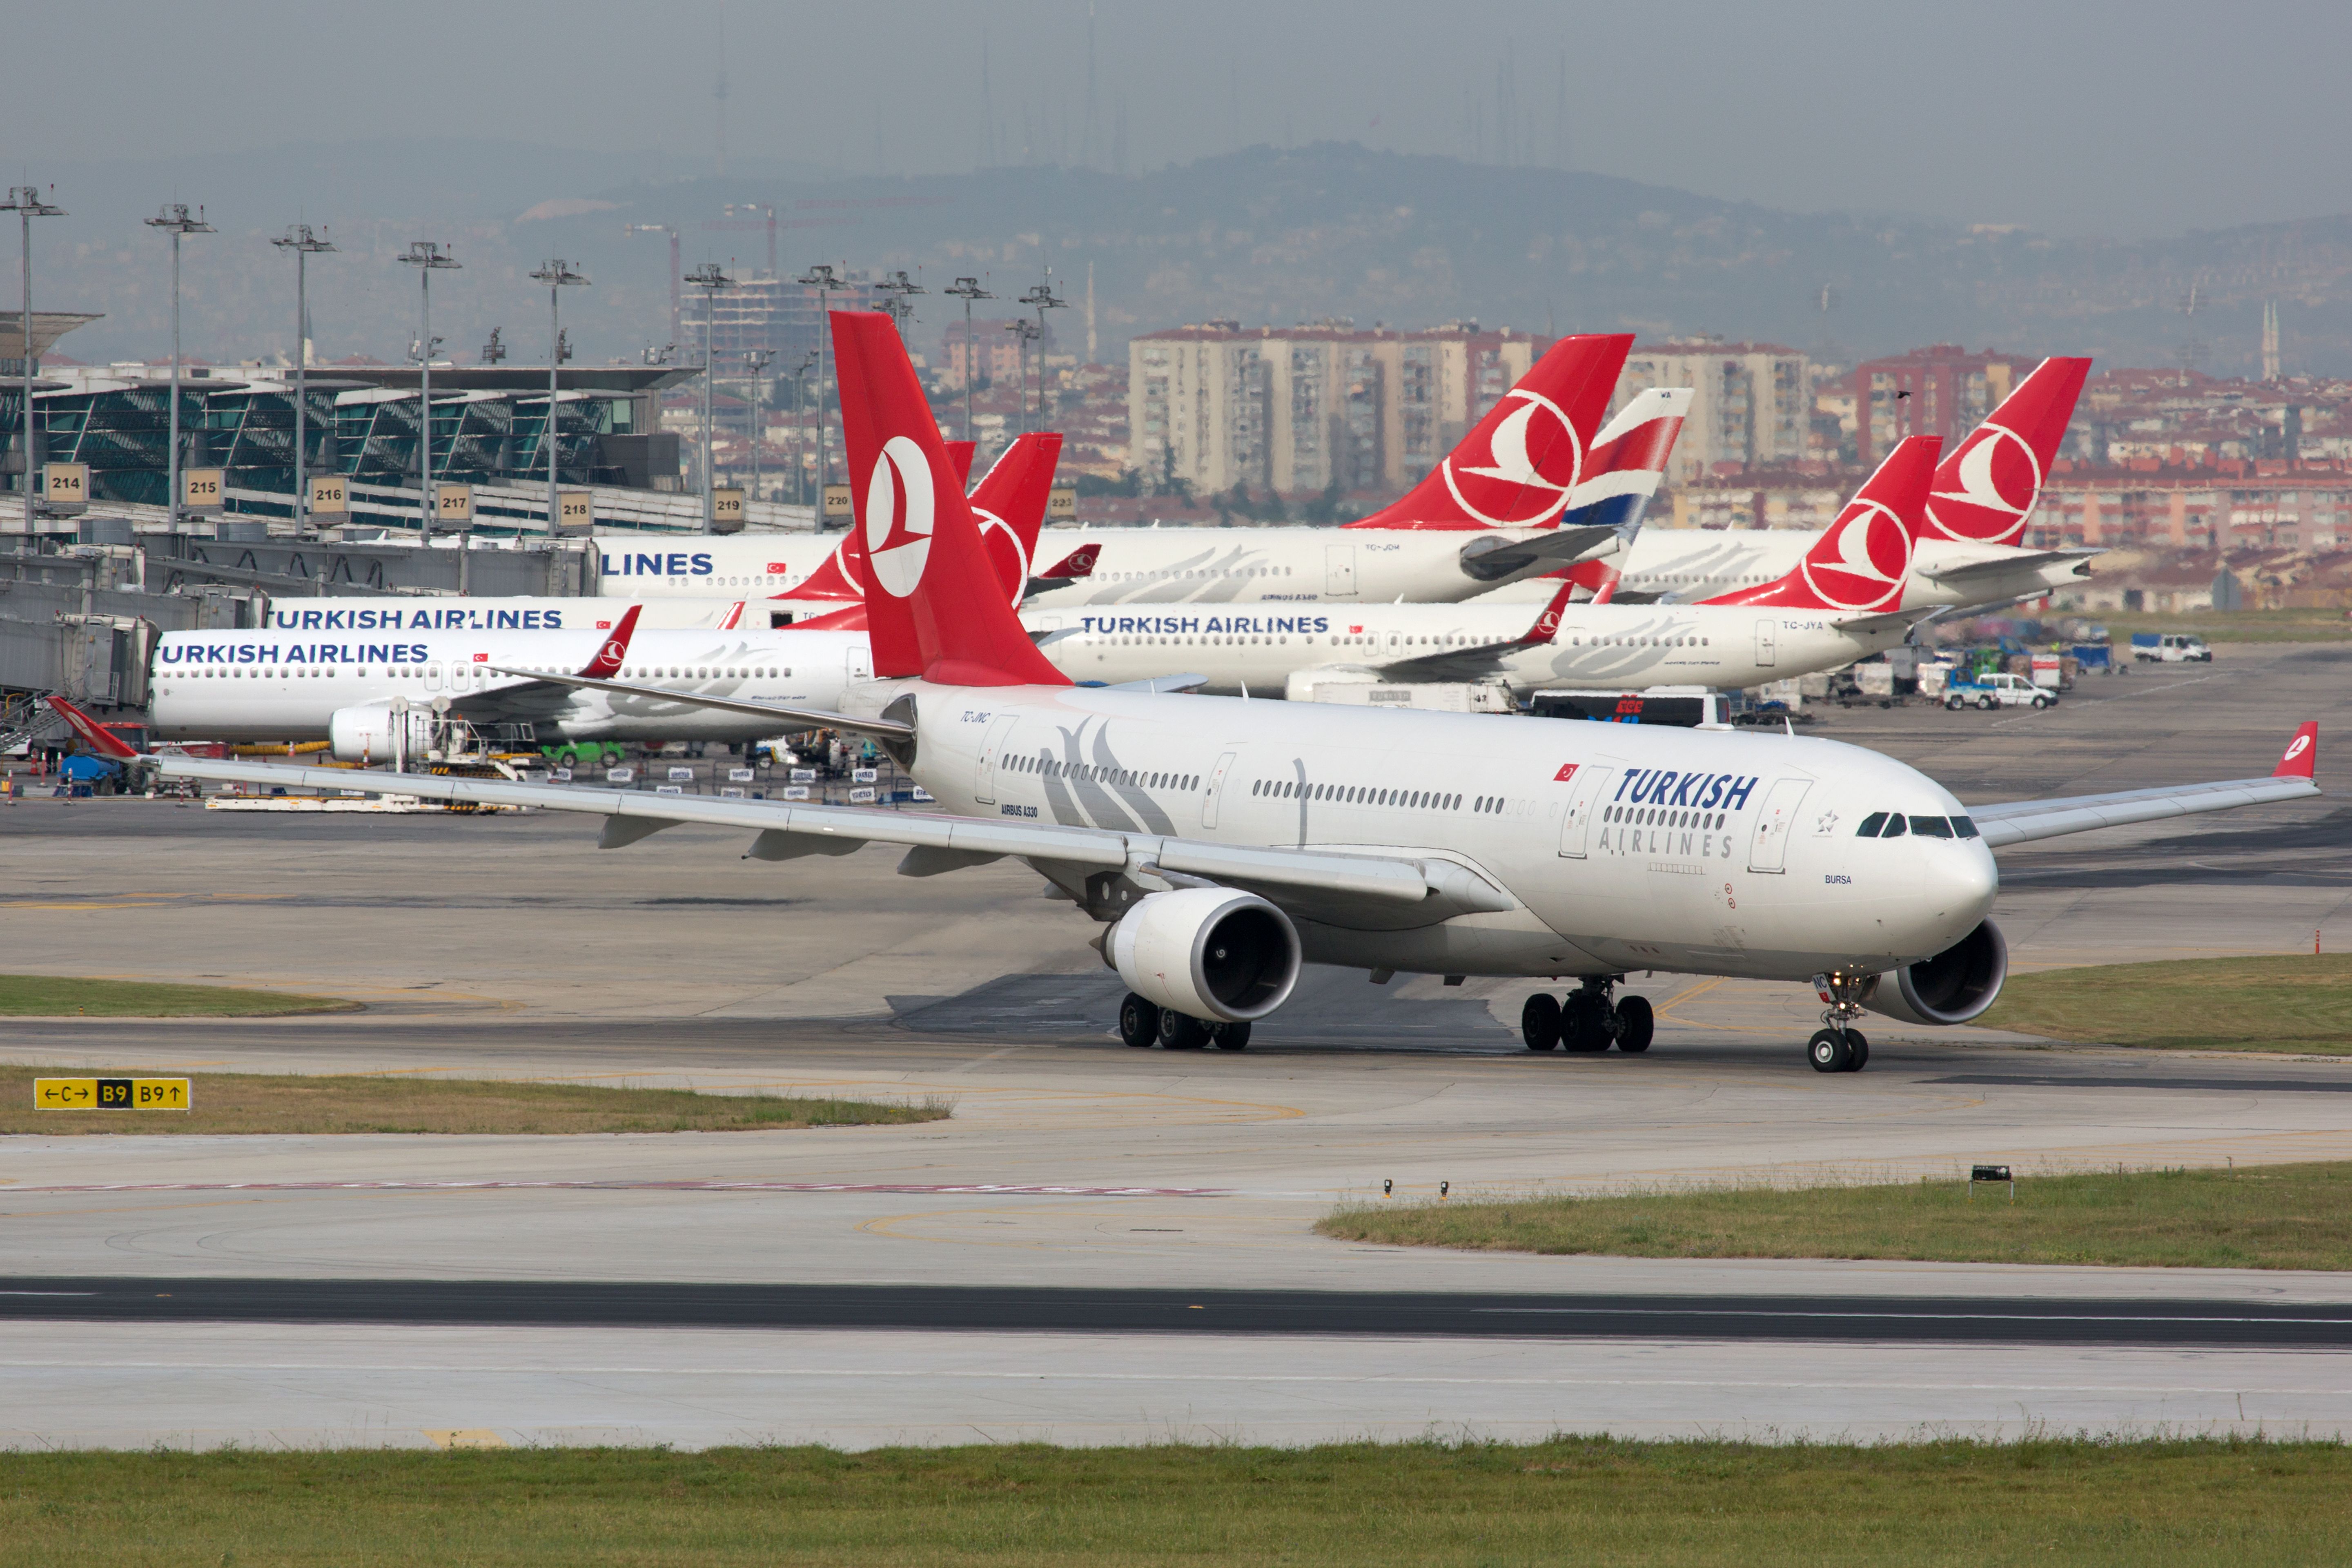 Many Turkish Airlines Planes parked and taxiing at Istanbul Airport.